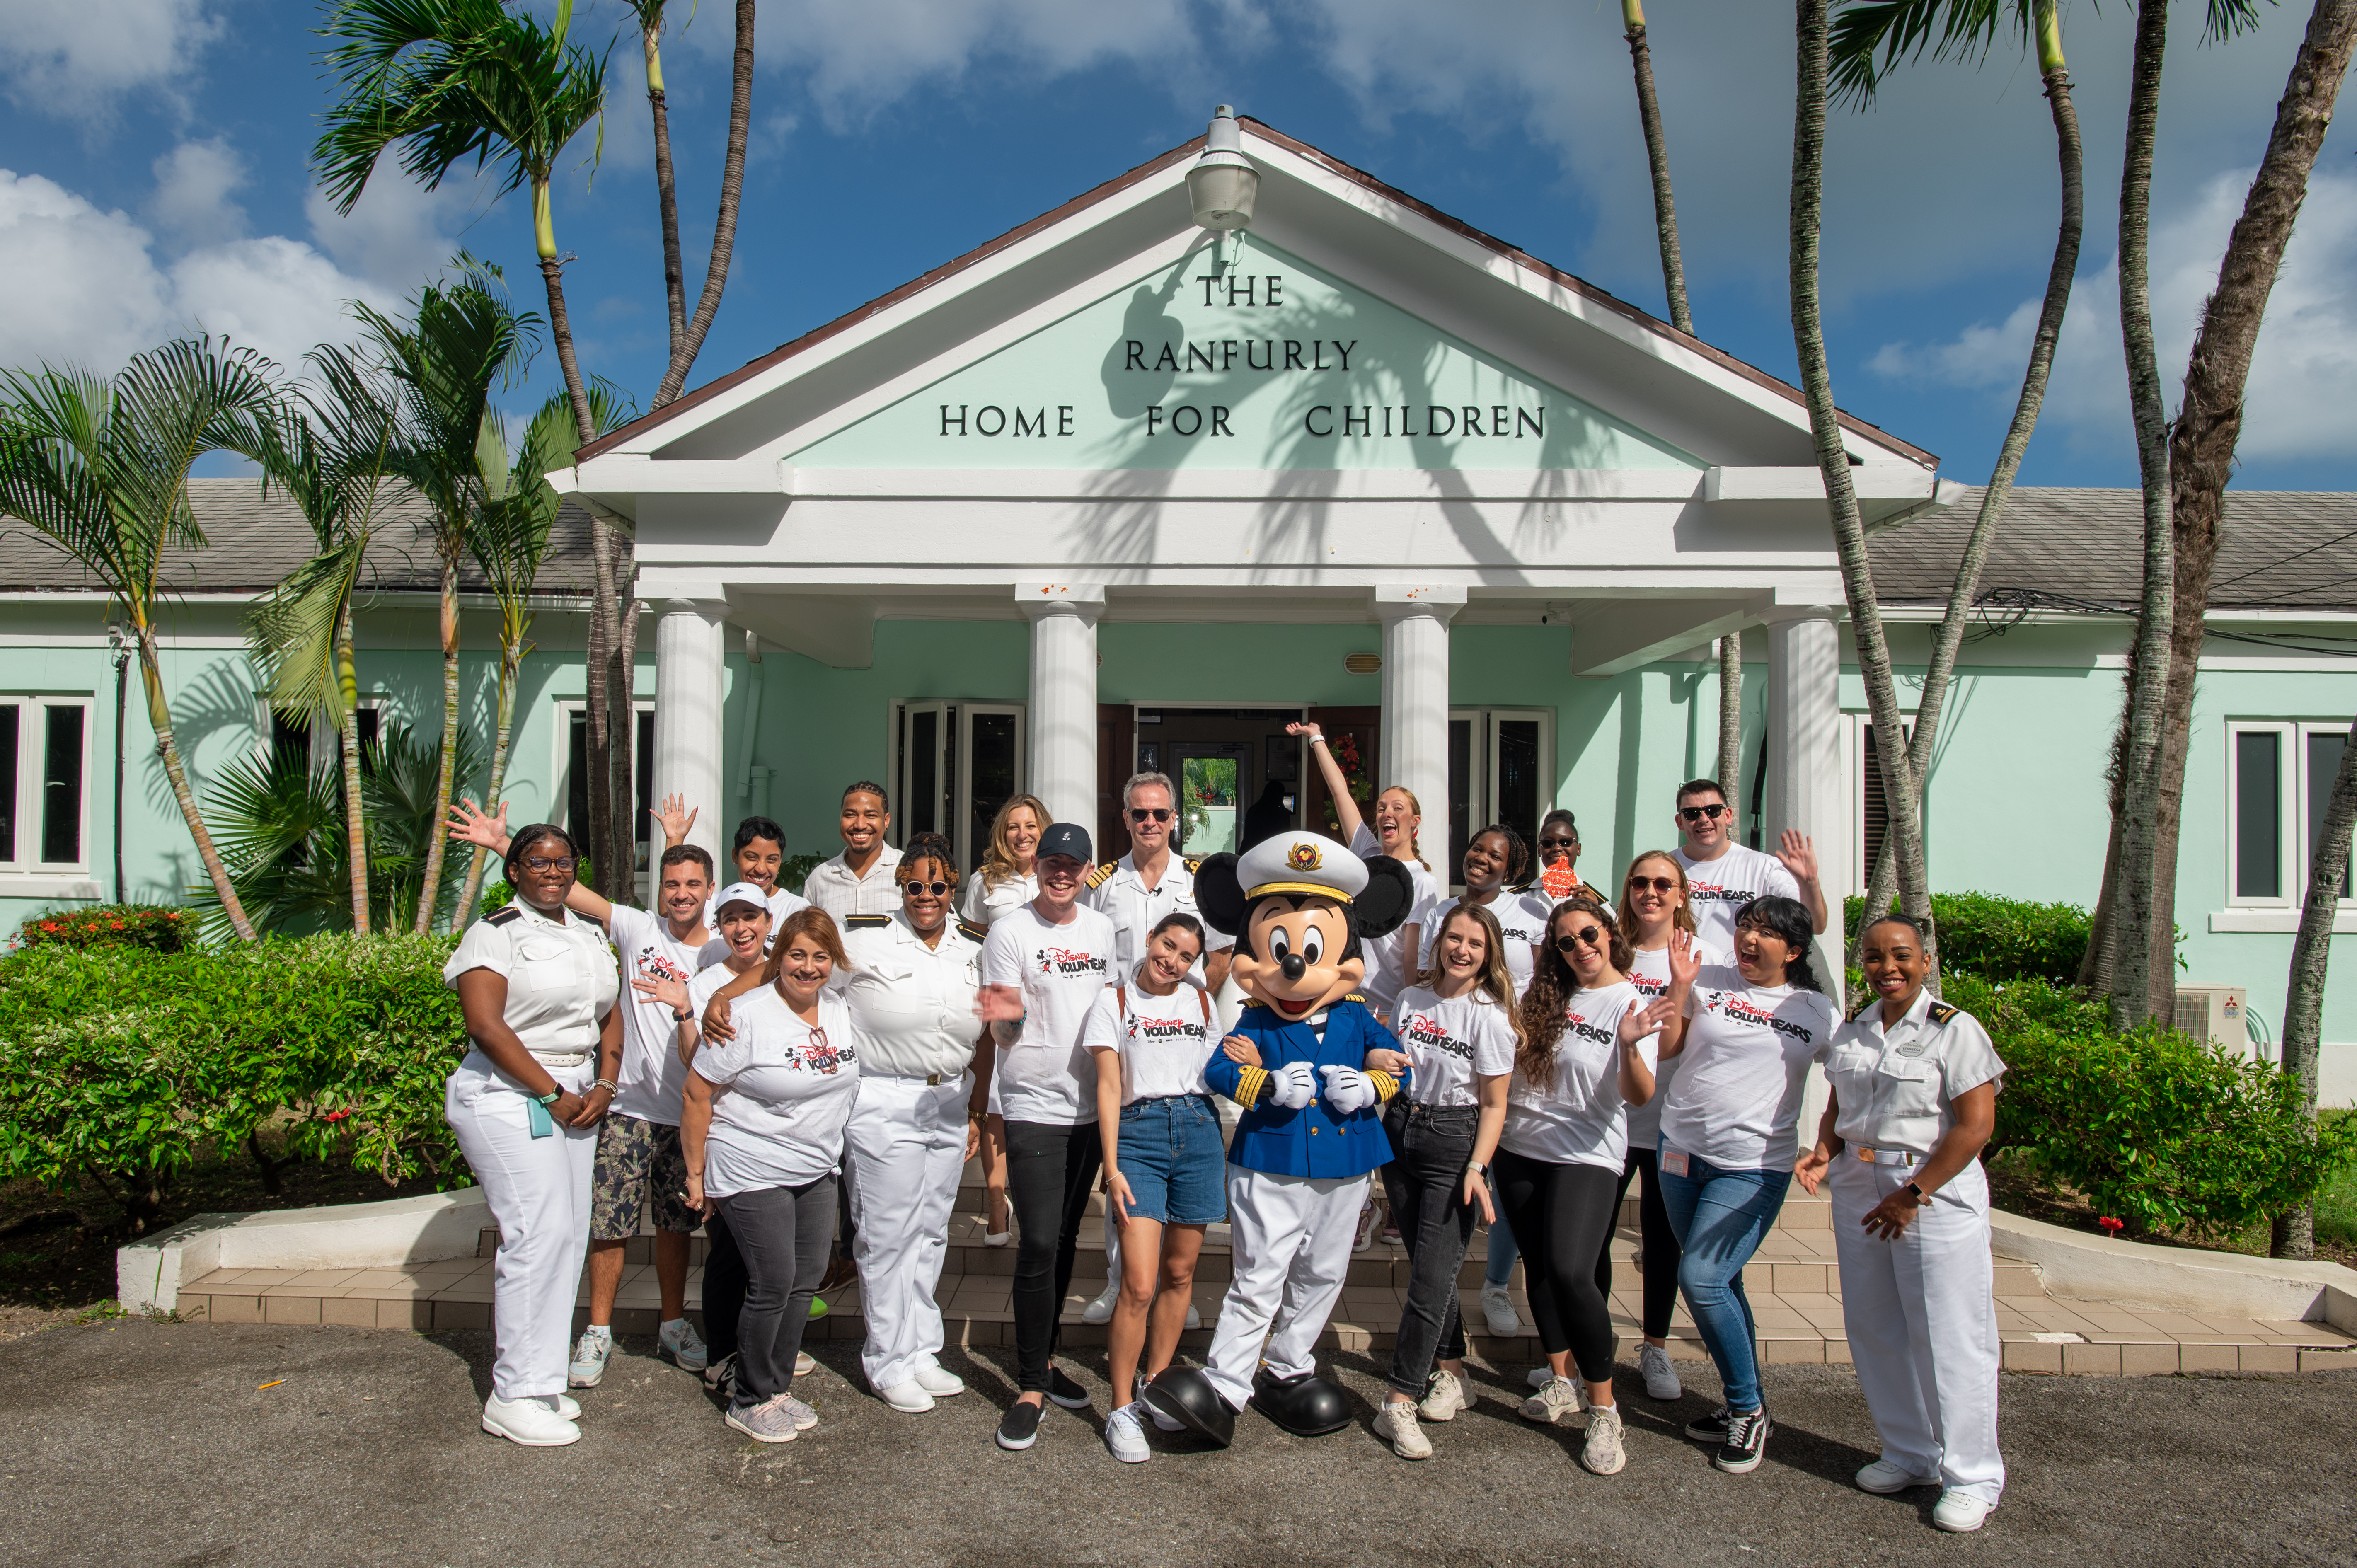 Disney Cruise Line Brings Holiday Cheer to Residents of the Ranfurly Homes for Children in The Bahamas (Image at LateCruiseNews.com - December 2022)